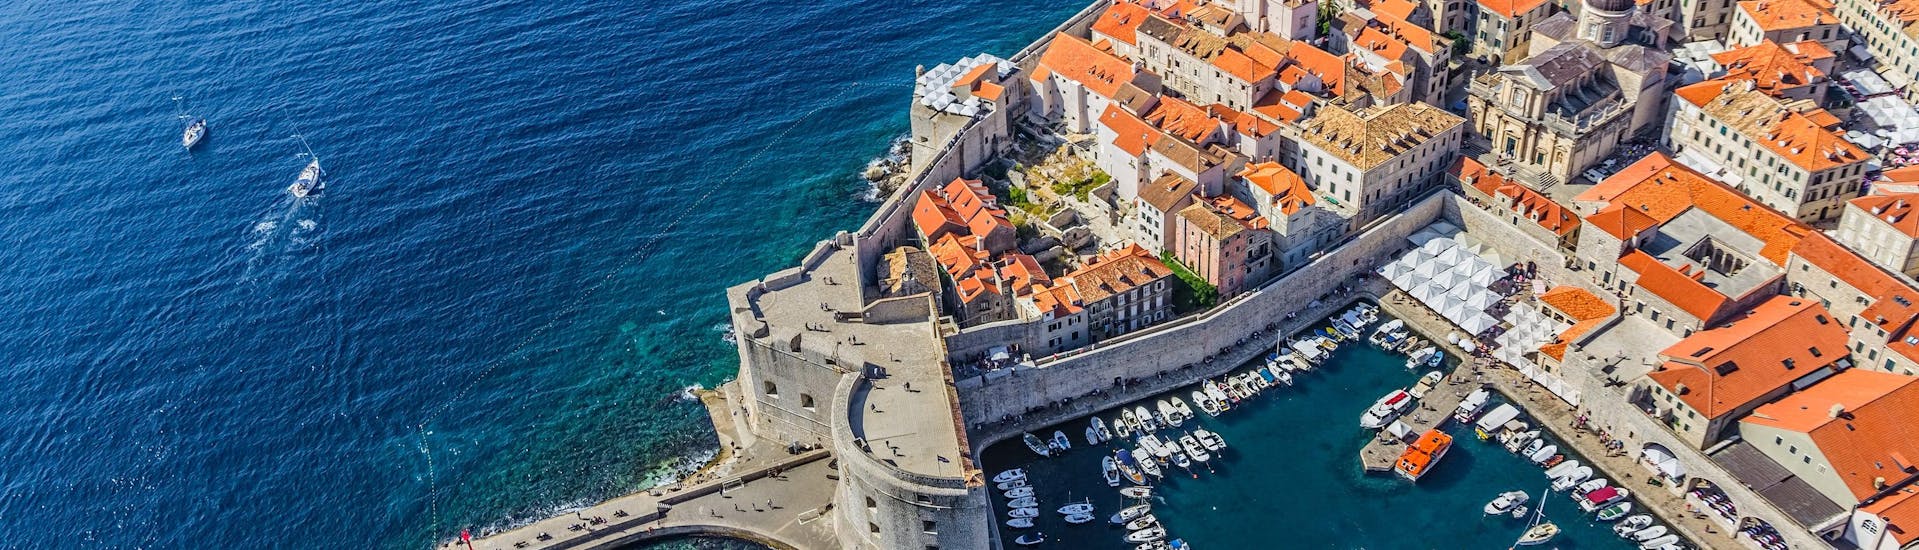 An aerial view of several boats anchored in the old port, a common departure point for boat tours in Dubrovnik.